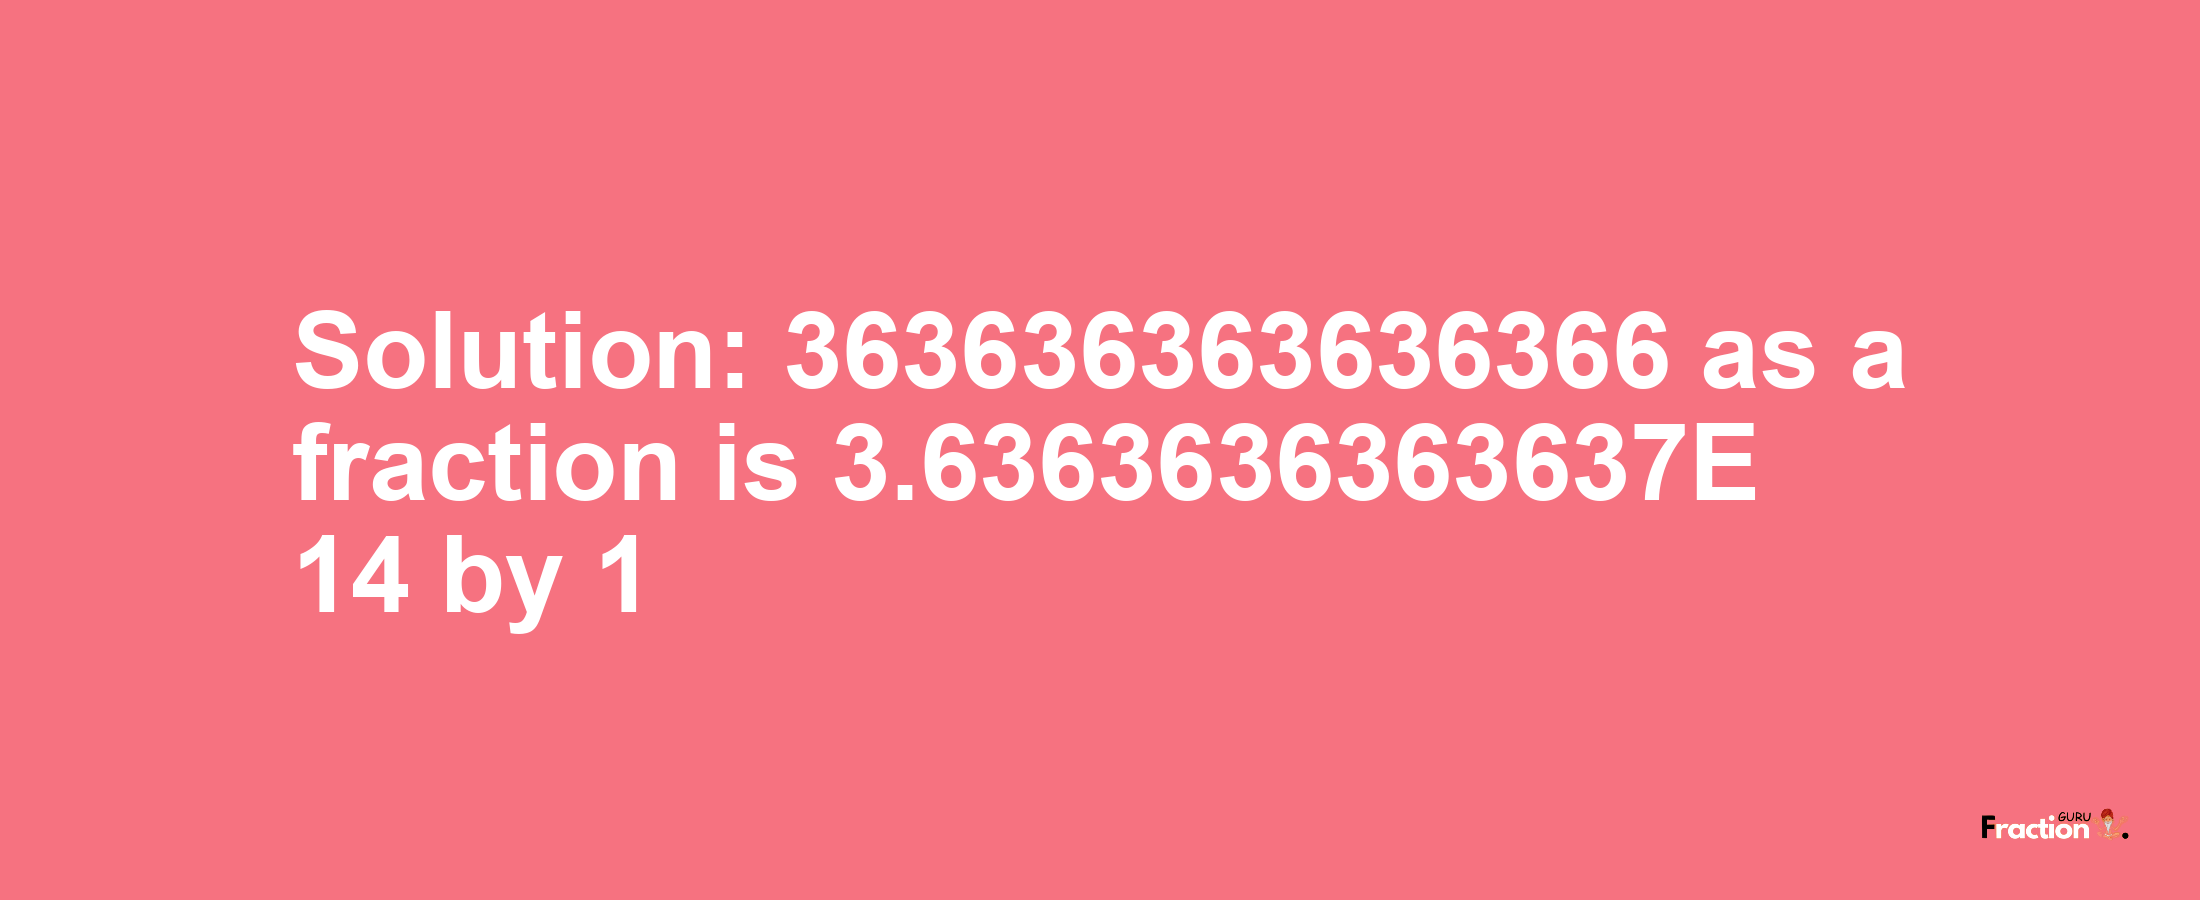 Solution:363636363636366 as a fraction is 3.6363636363637E+14/1